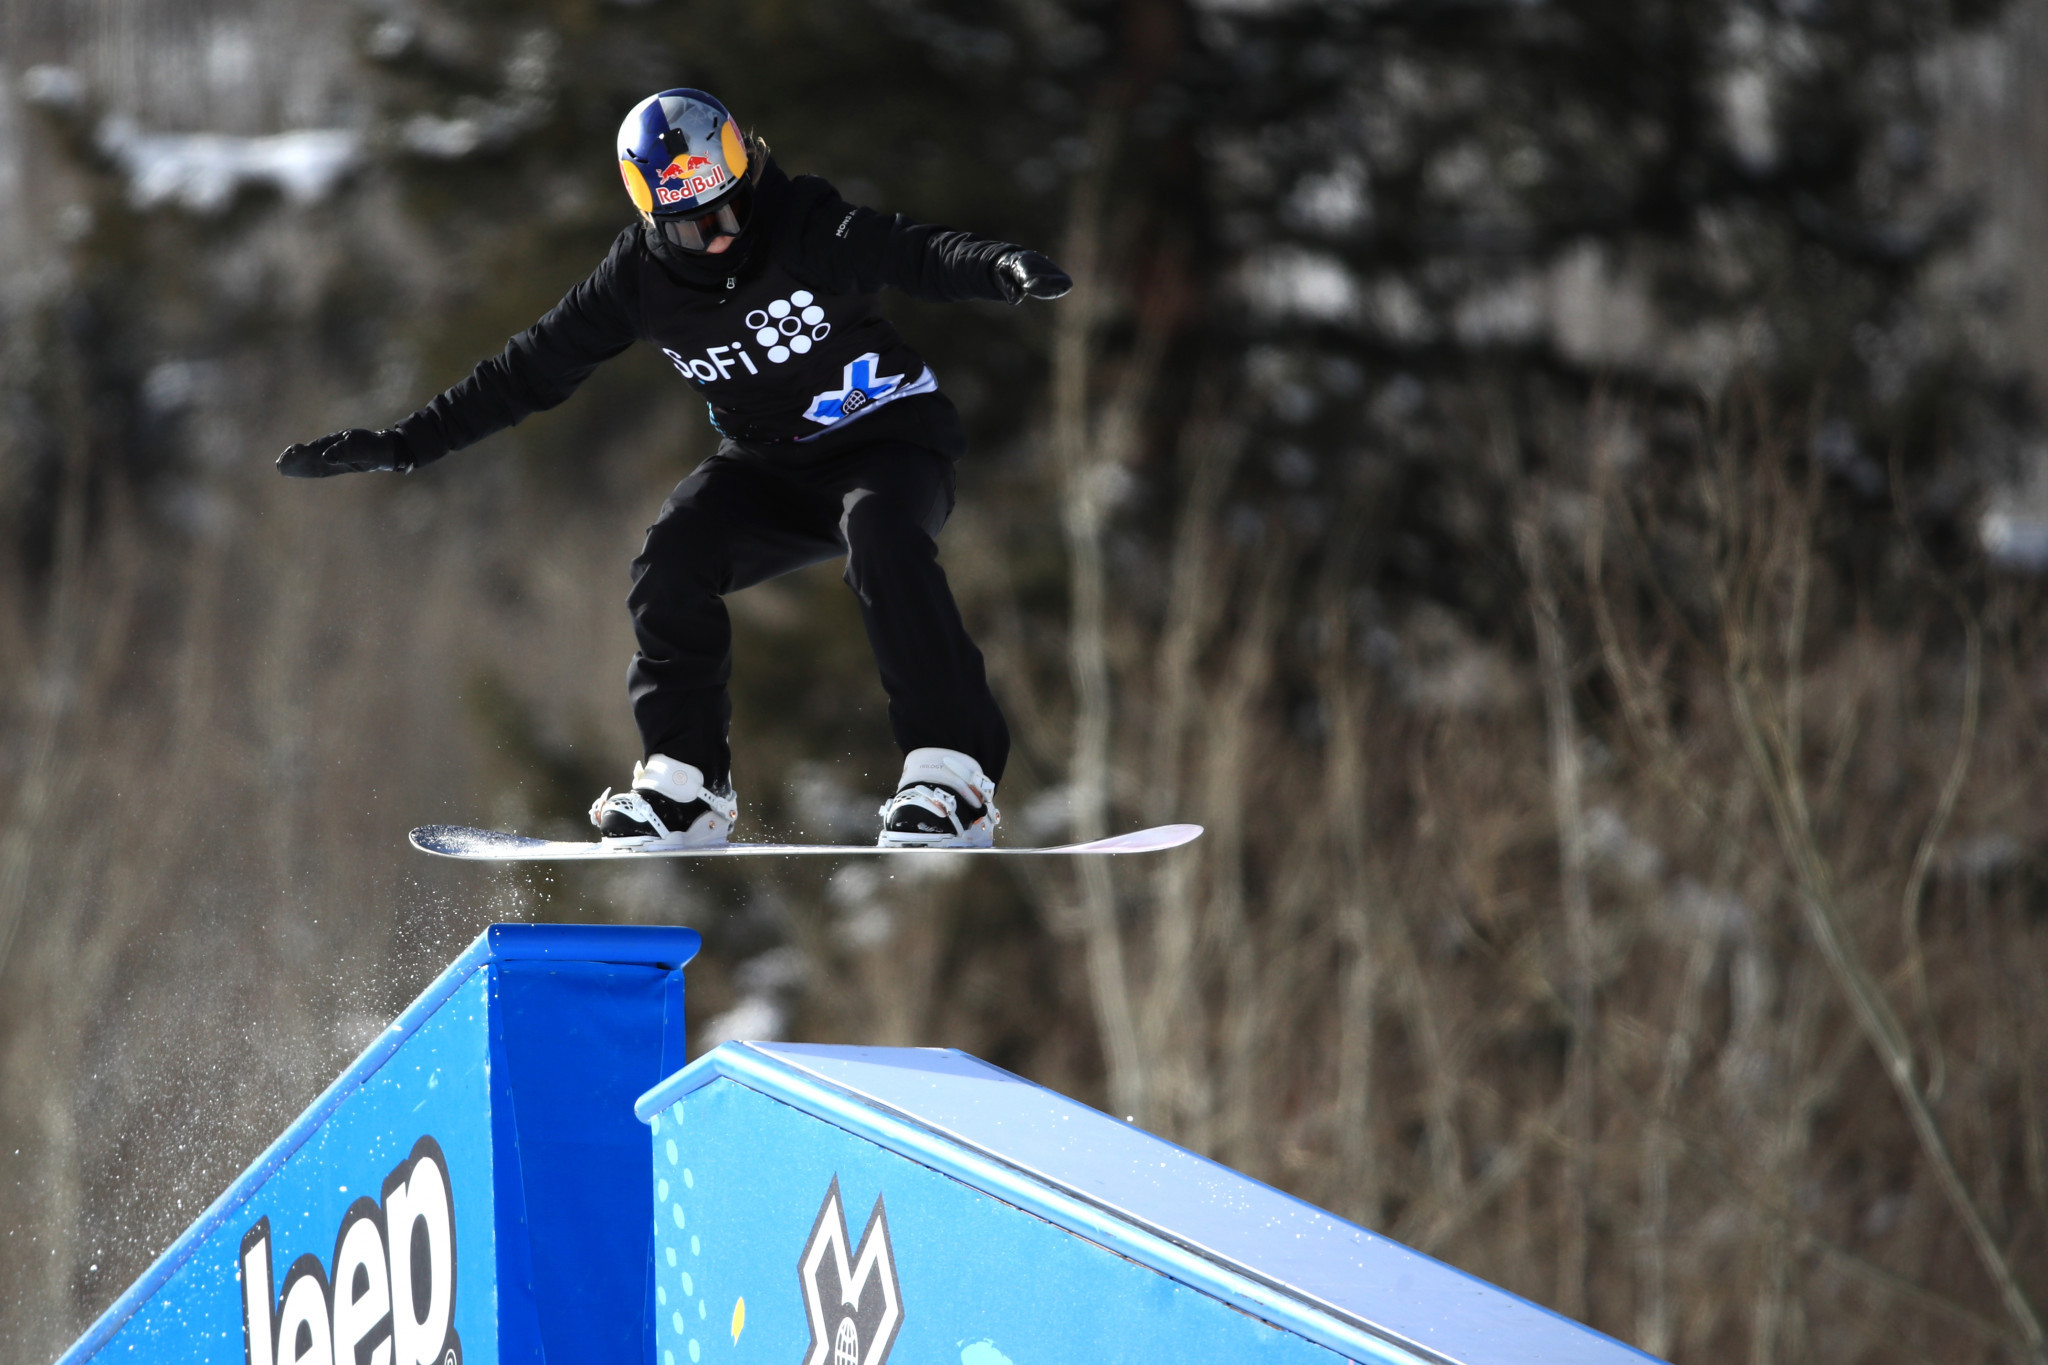 Sadowski-Synnott becomes first New Zealand snowboarder to win Winter X Games gold medal